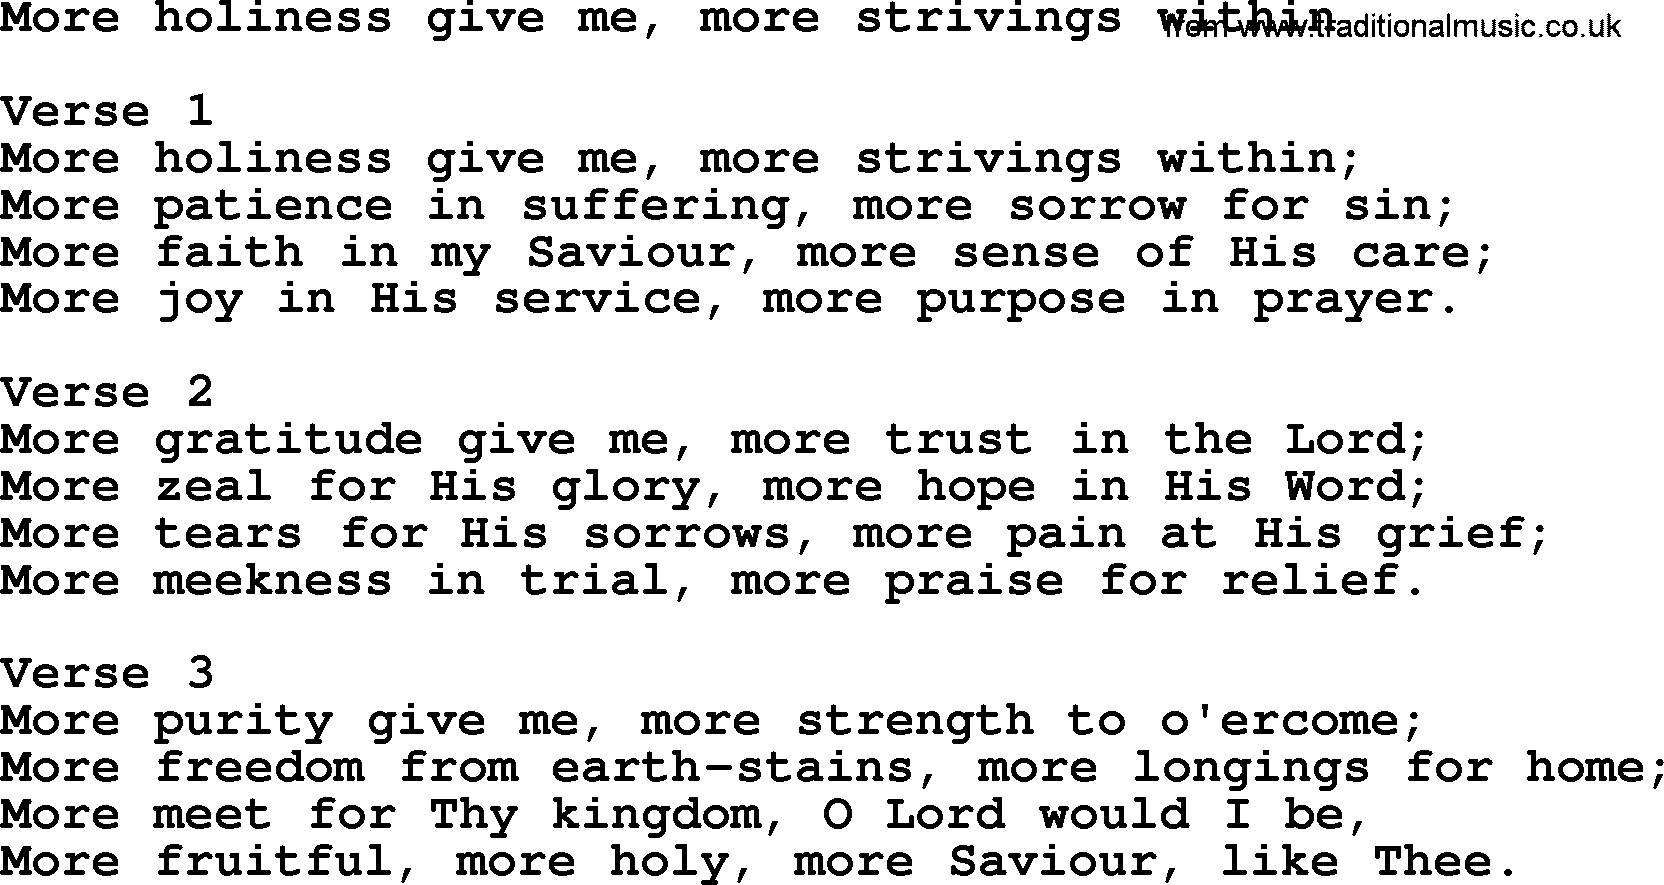 Apostolic and Pentecostal Hymns and Gospel Songs, Hymn: More Holiness Give Me, More Strivings Within, Christian lyrics and PDF